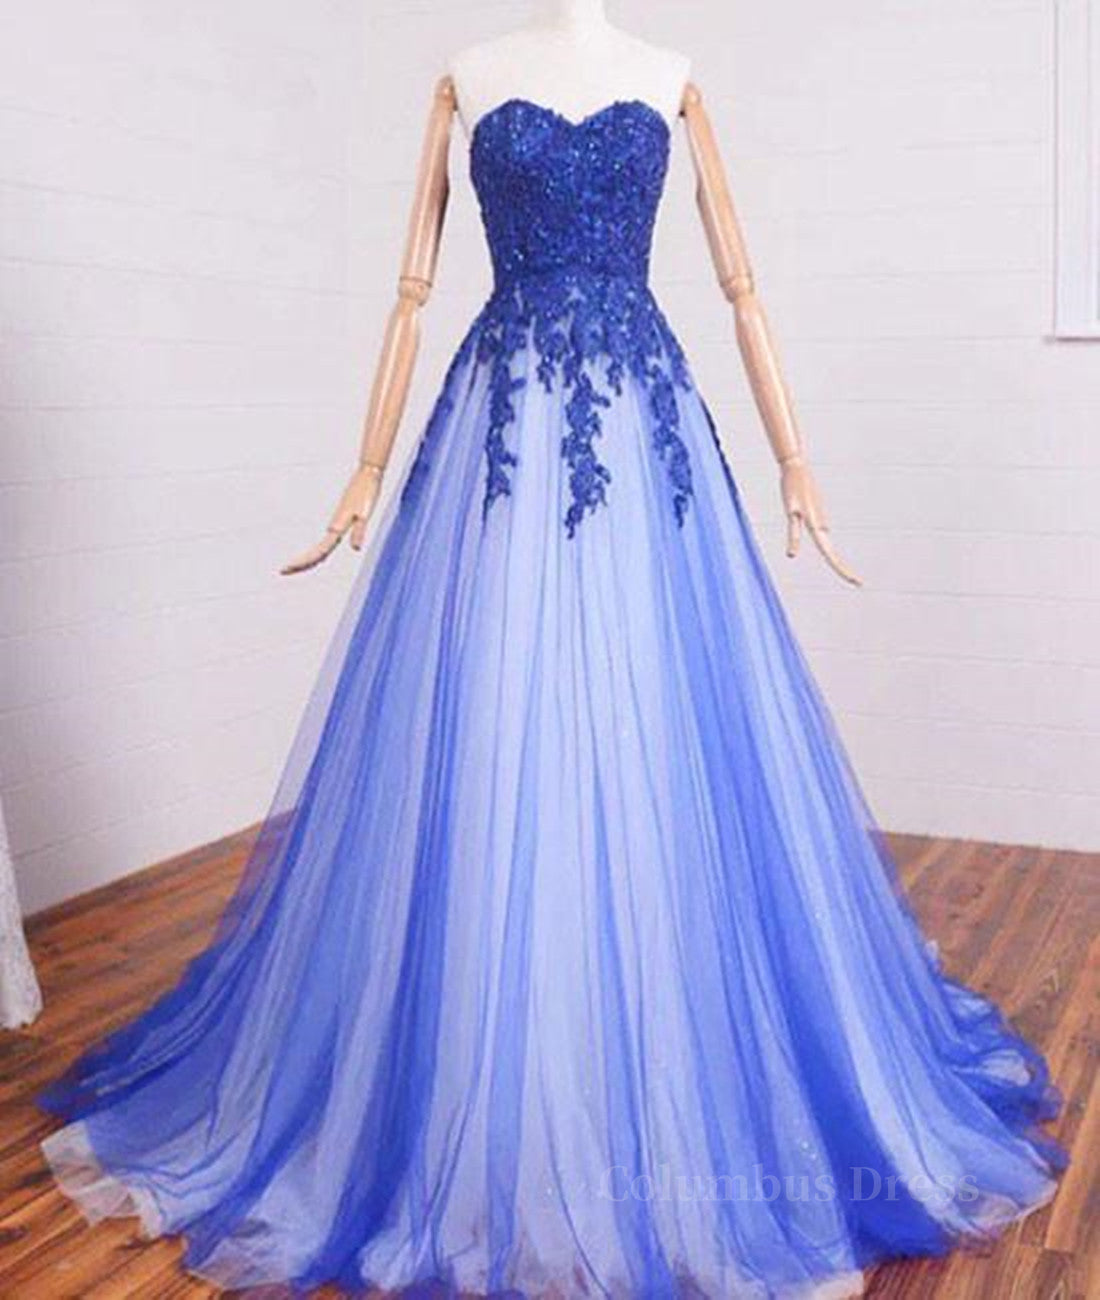 Bridesmaids Dresses Long, A Line Sweetheart Neck Lace Tulle Blue Long Prom Dresses, Blue Formal Dresses, Blue Lace Evening Dresses